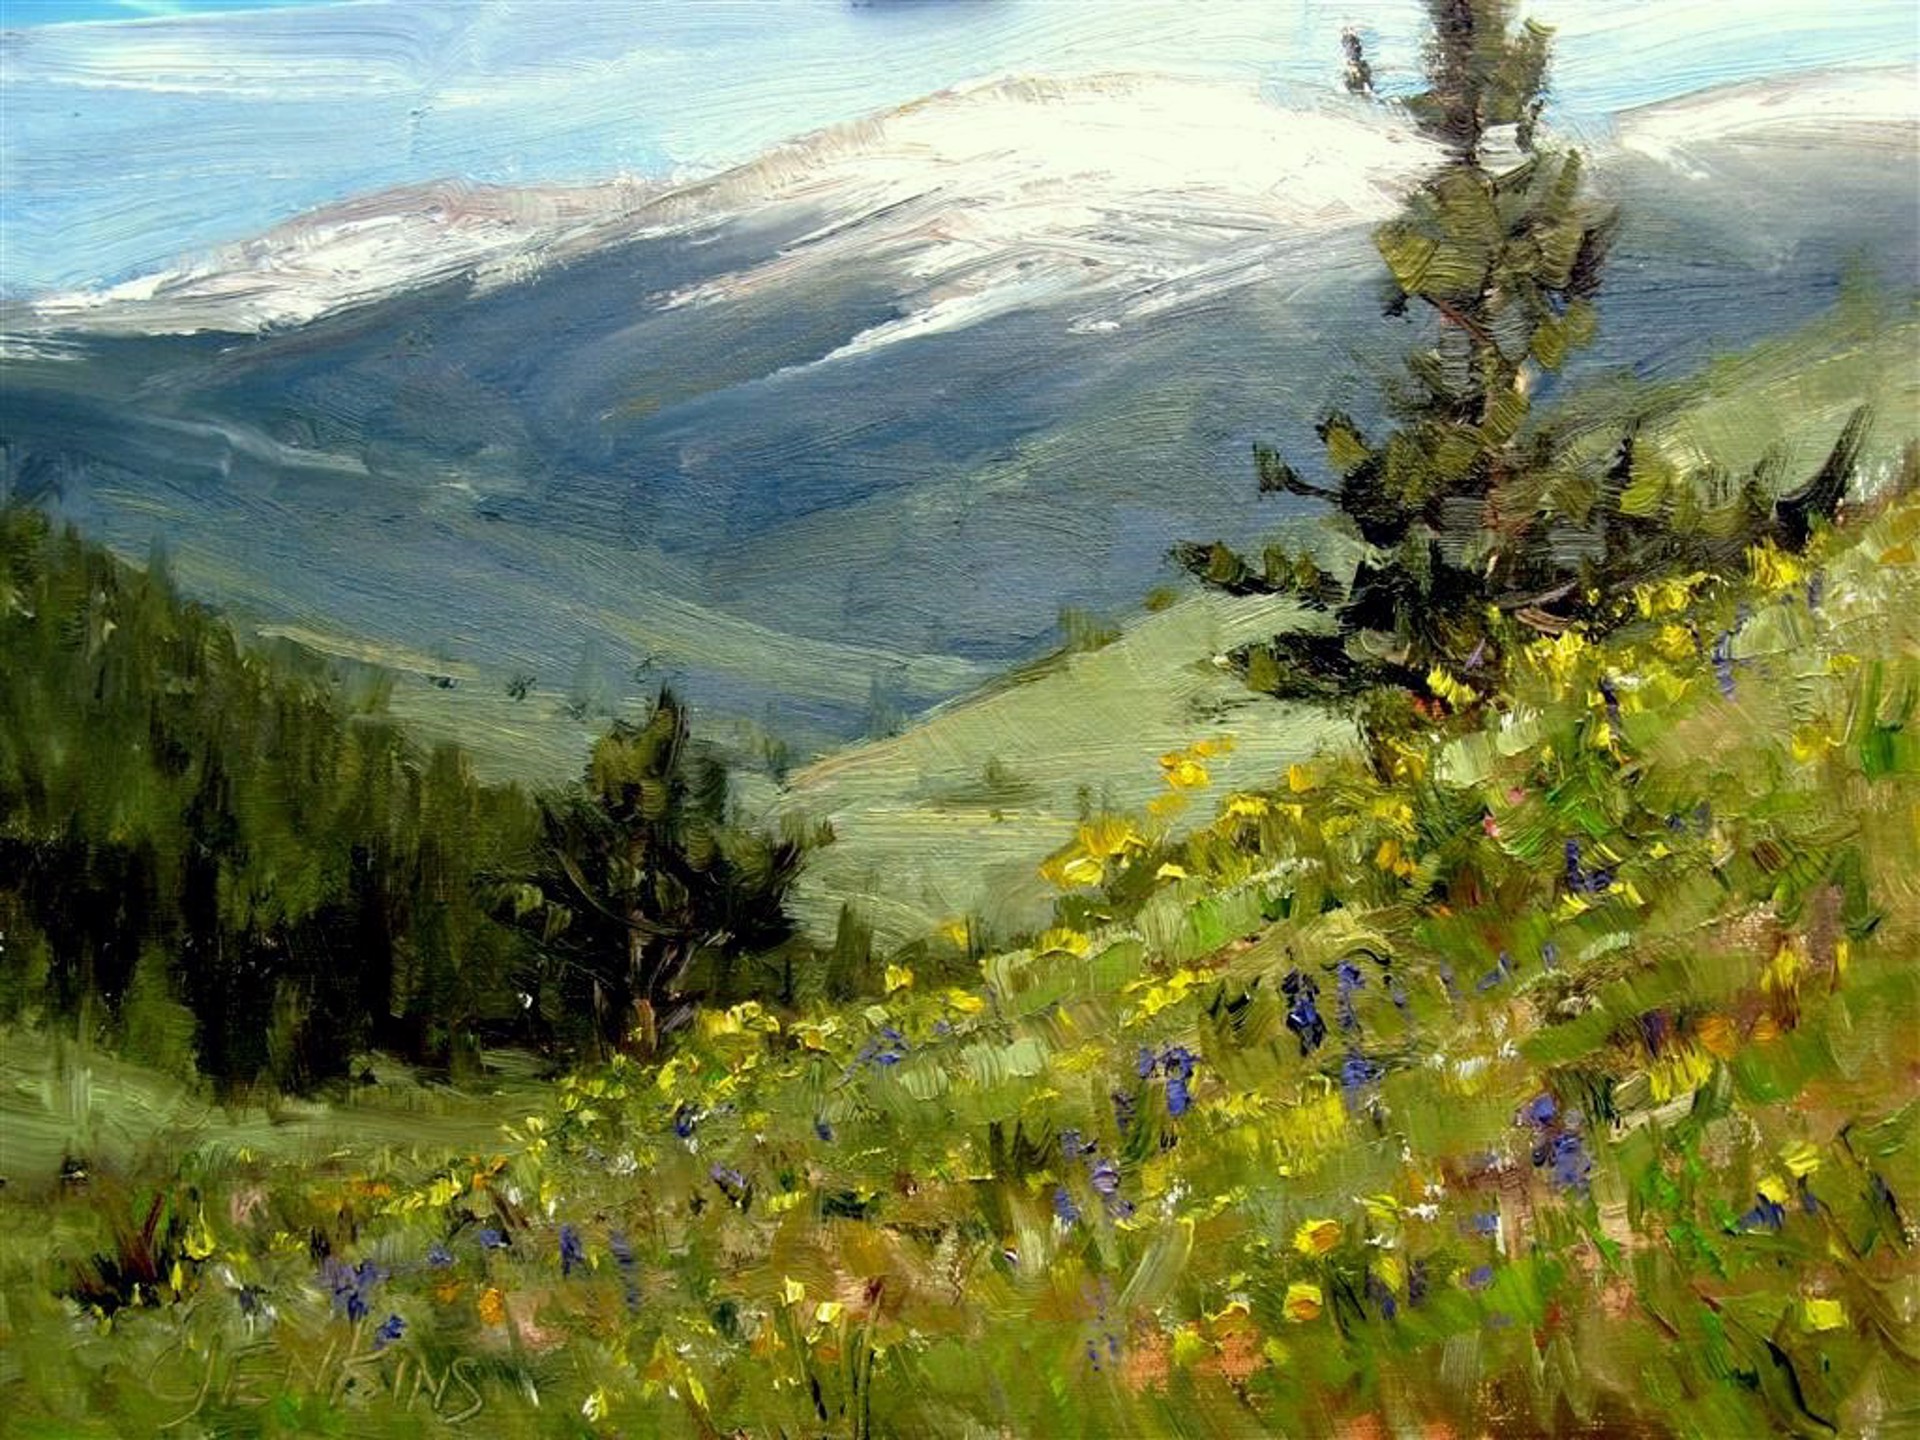 High in the Rockies by Carol Jenkins